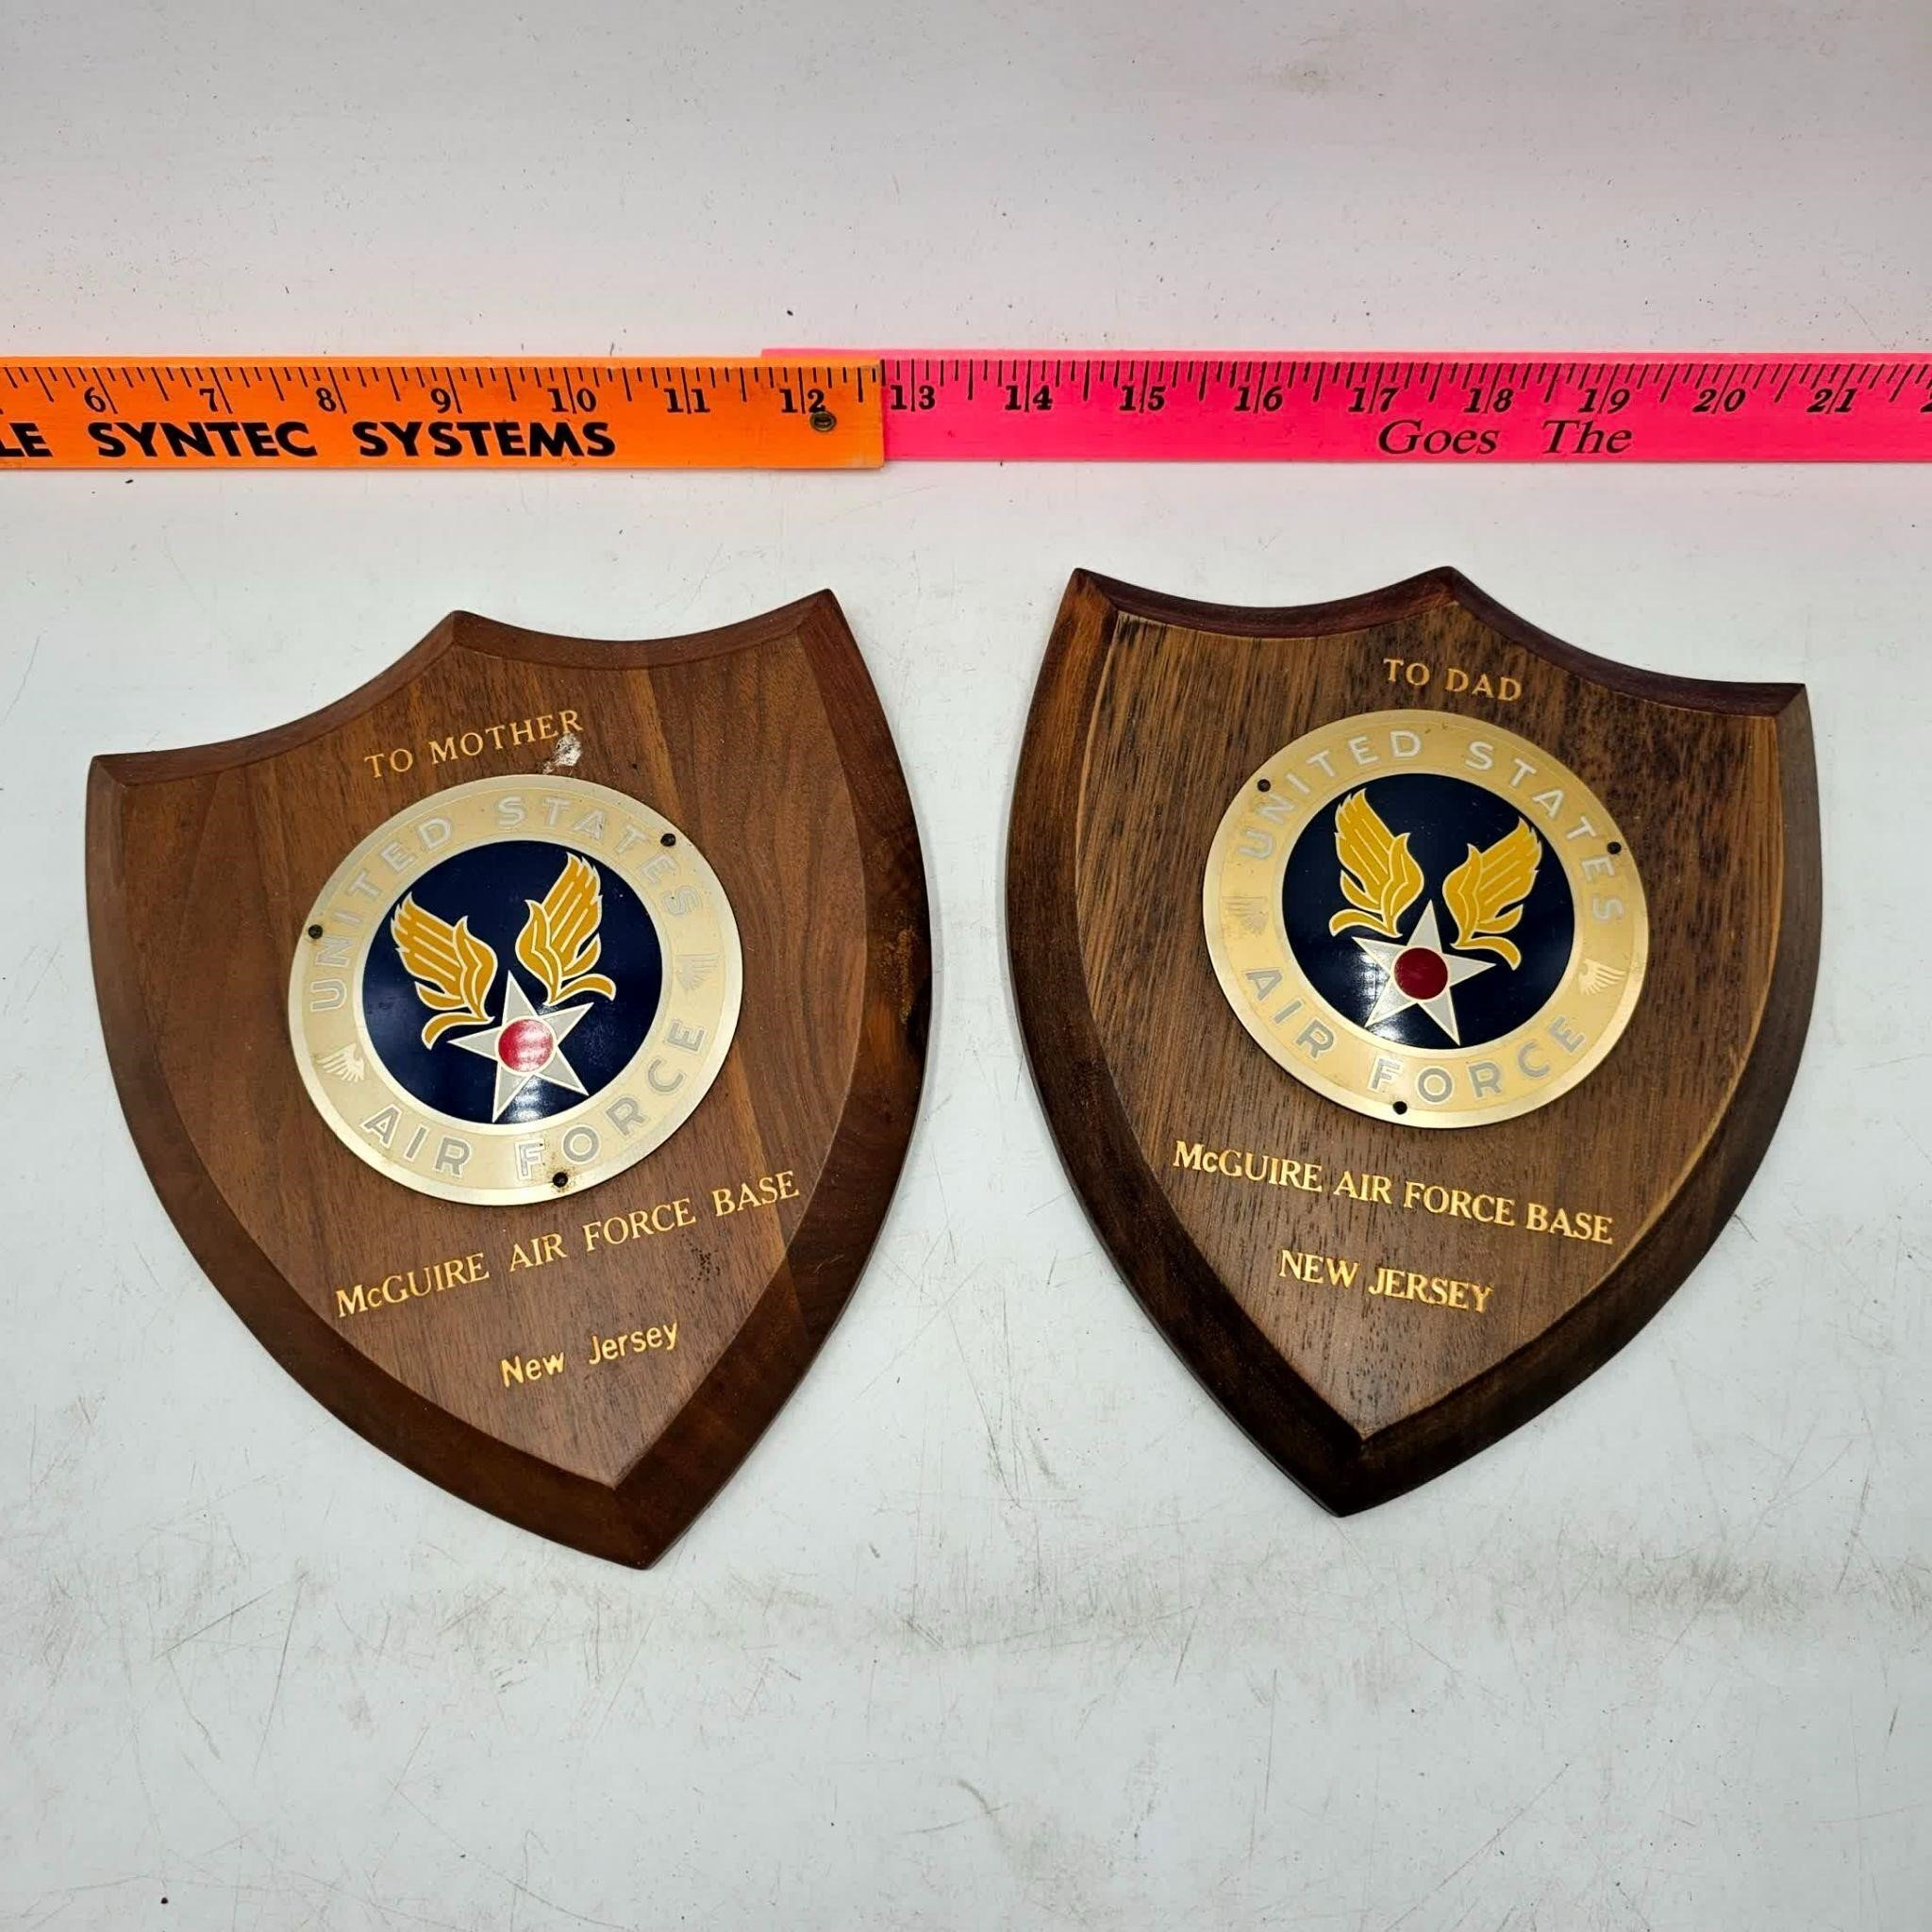 2 US Air Force Planks